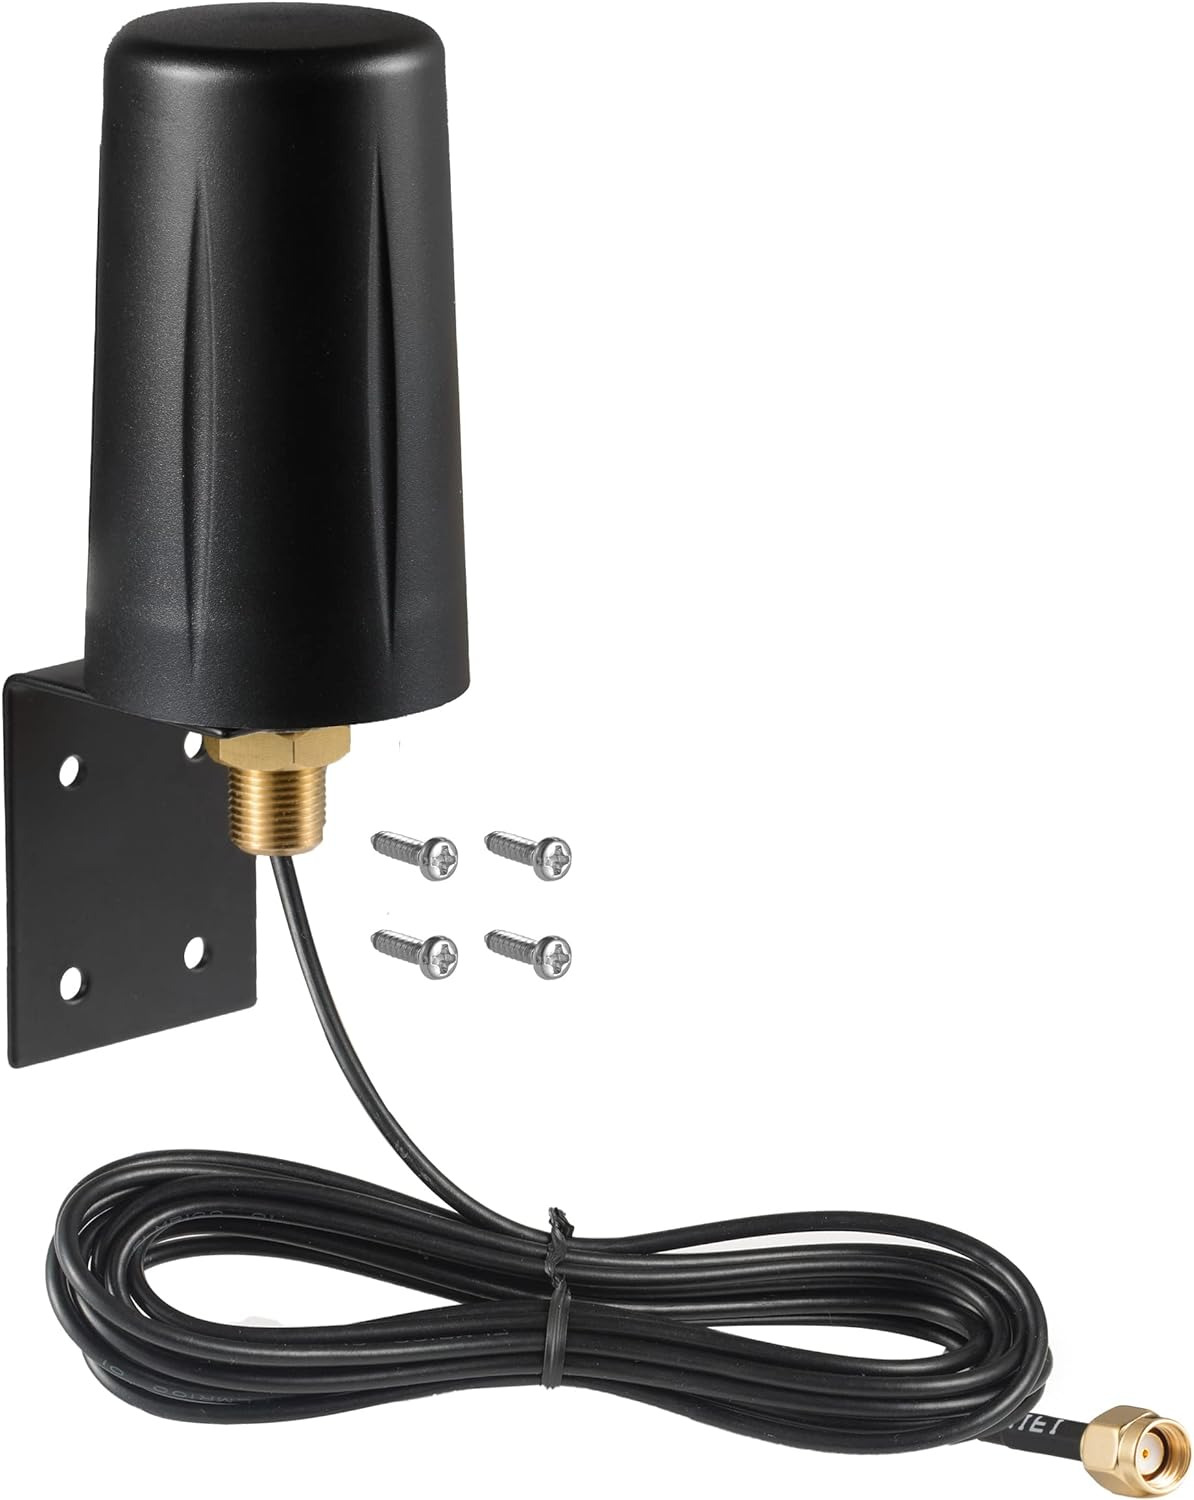 Outdoor 7Dbi Dual Band 2.4Ghz 5Ghz 5.8Ghz Long Range Wifi Booster Antenna For